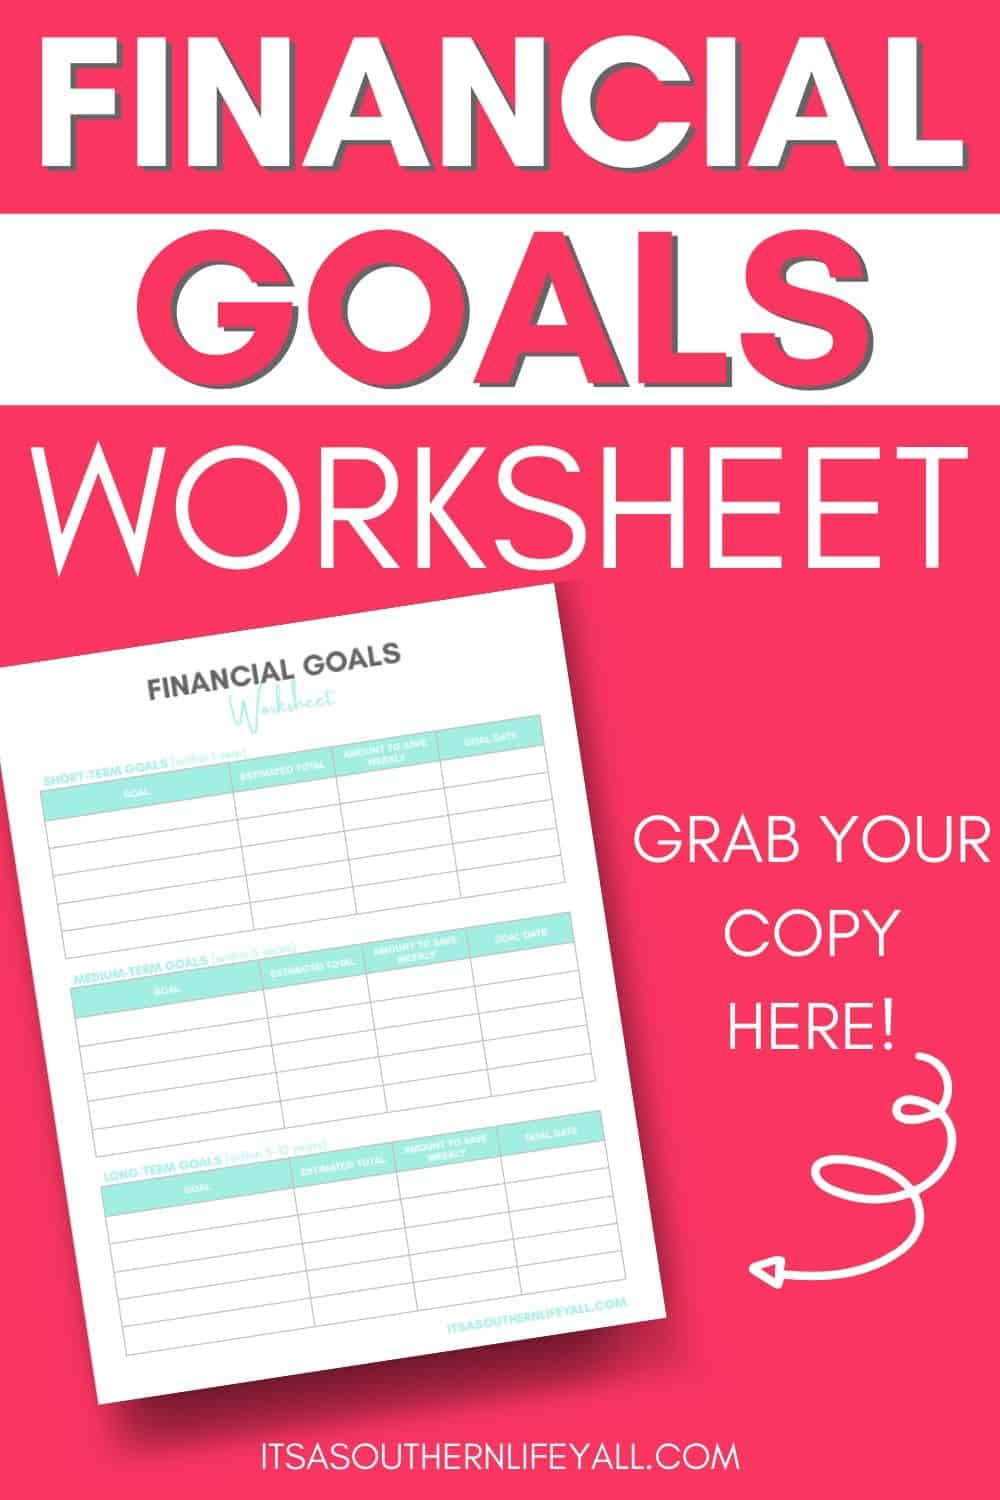 Financial Goals Worksheet overlay on bright background with image of worksheet.